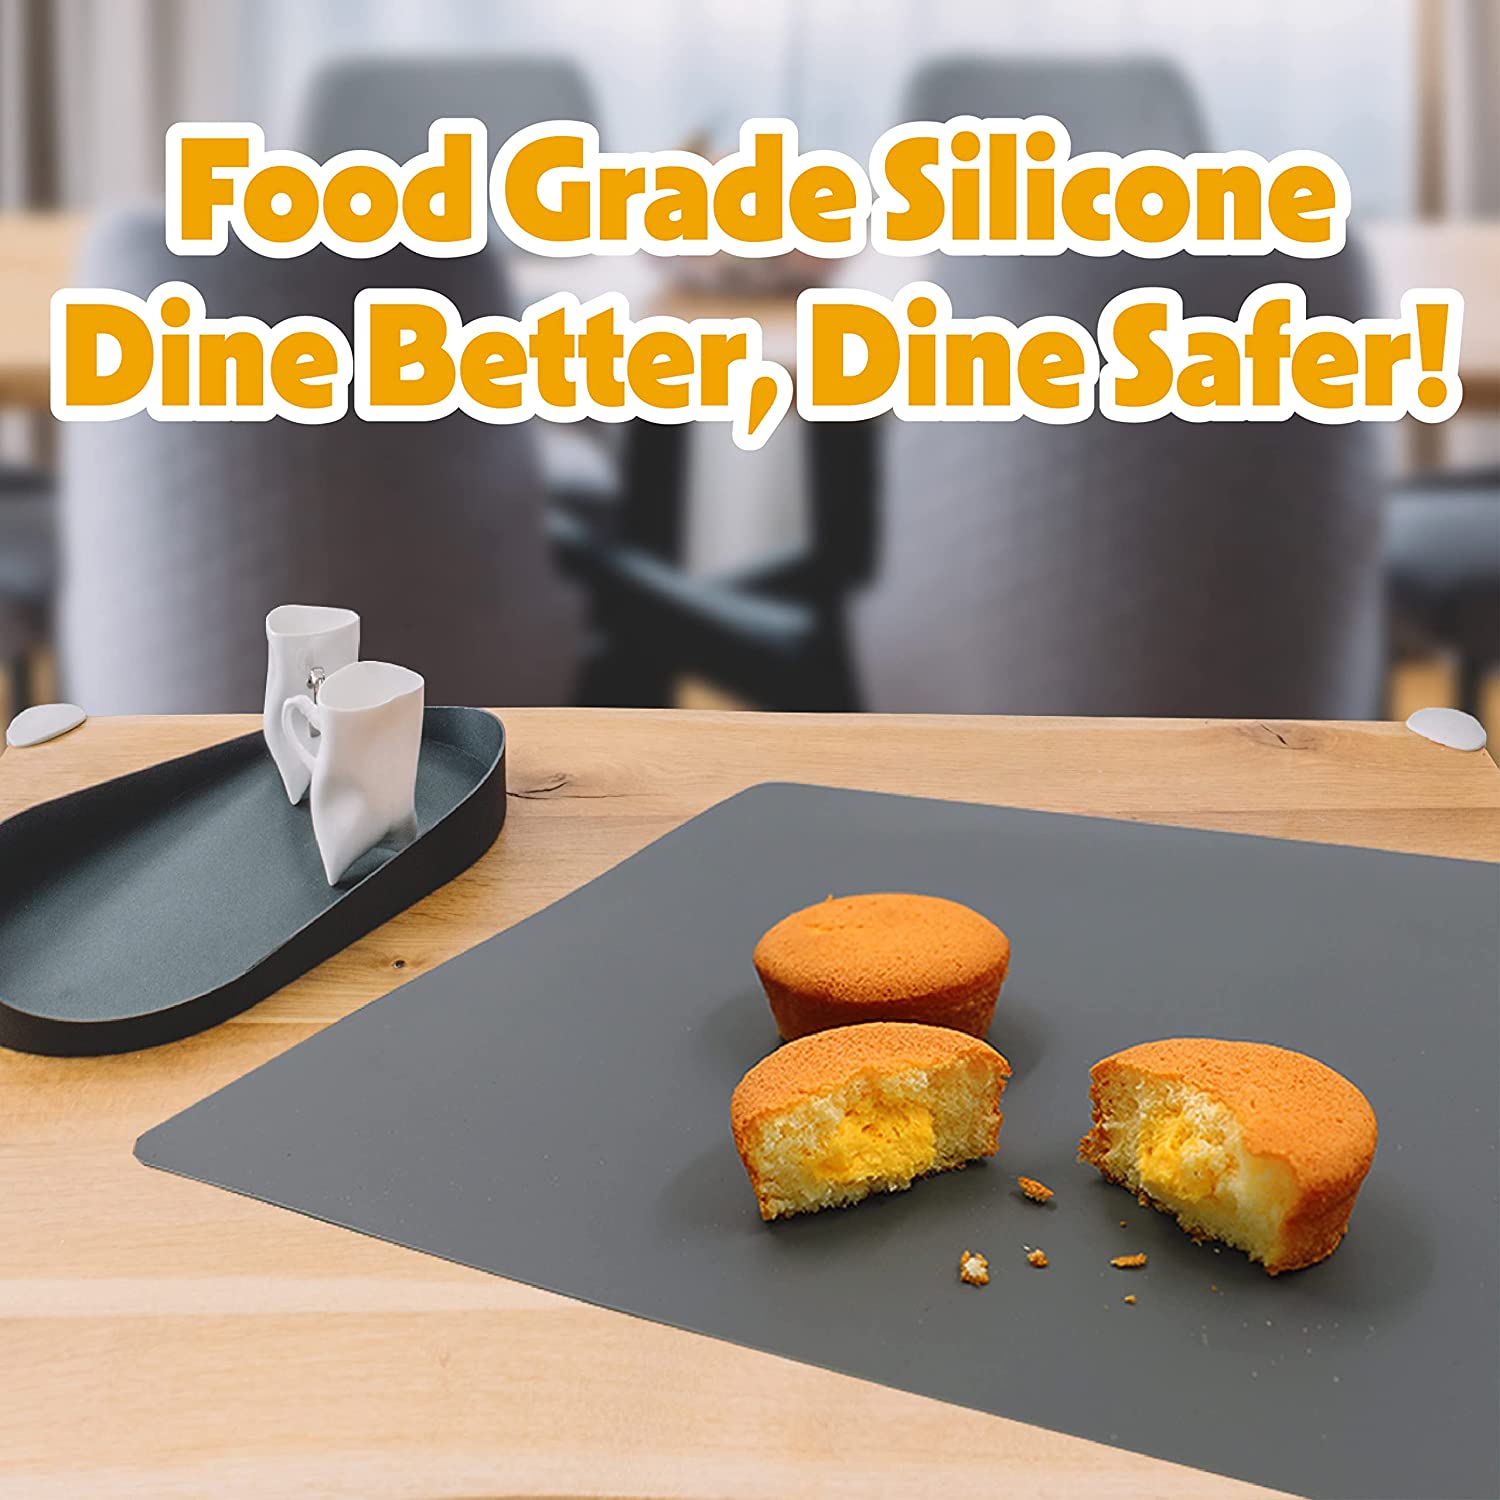 Silicone Heat Resistant Placemats | 4pc Silicone Placemat, 15.7" x 11.8" Place Mats as Baby Placemat, Heat Resistant Mat, Outdoor Placemats or Kitchen Table Mat | Placemats Set of 4, Grey